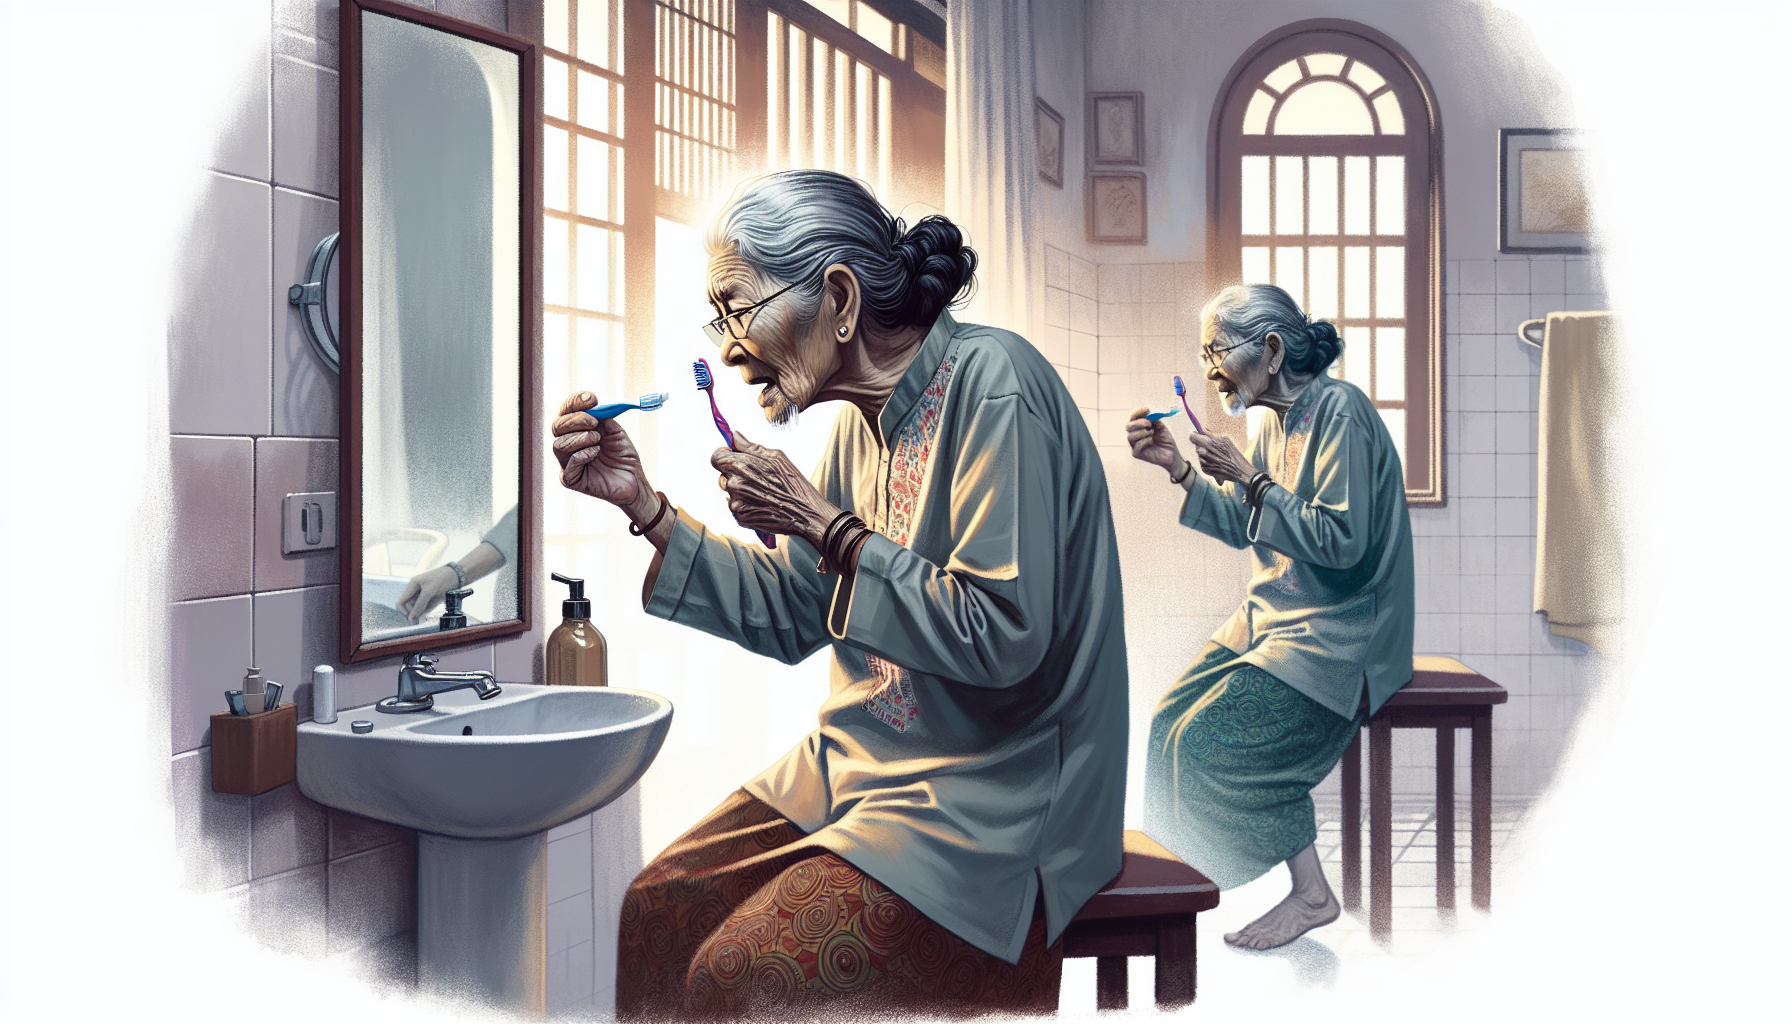 Illustration of a person with dementia struggling with daily living activities